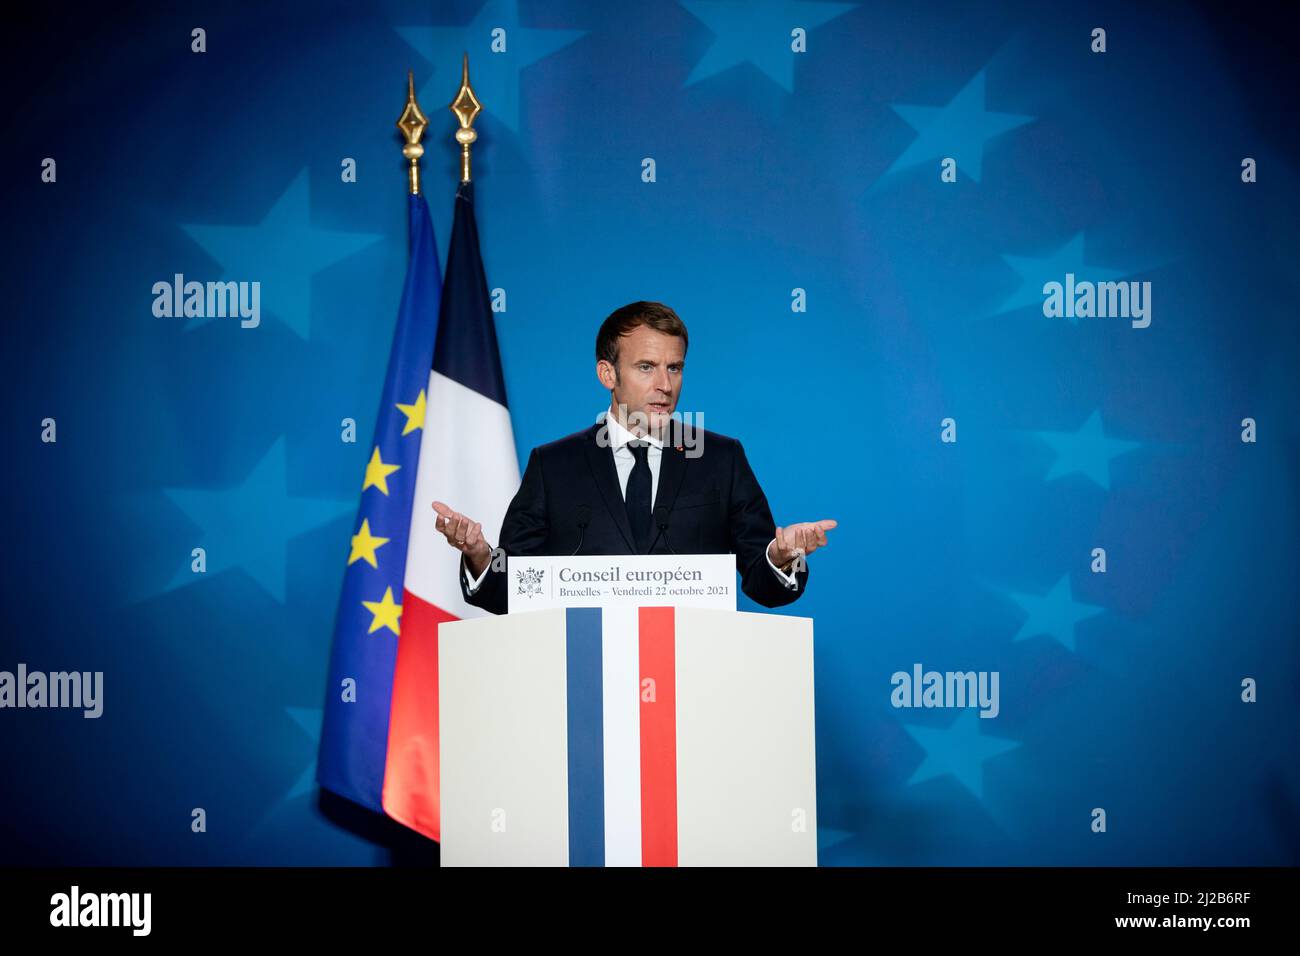 Belgium, Brussels, October 22, 2021: President of the French Republic Emmanuel Macron attending a press conference for the European Council meeting Stock Photo